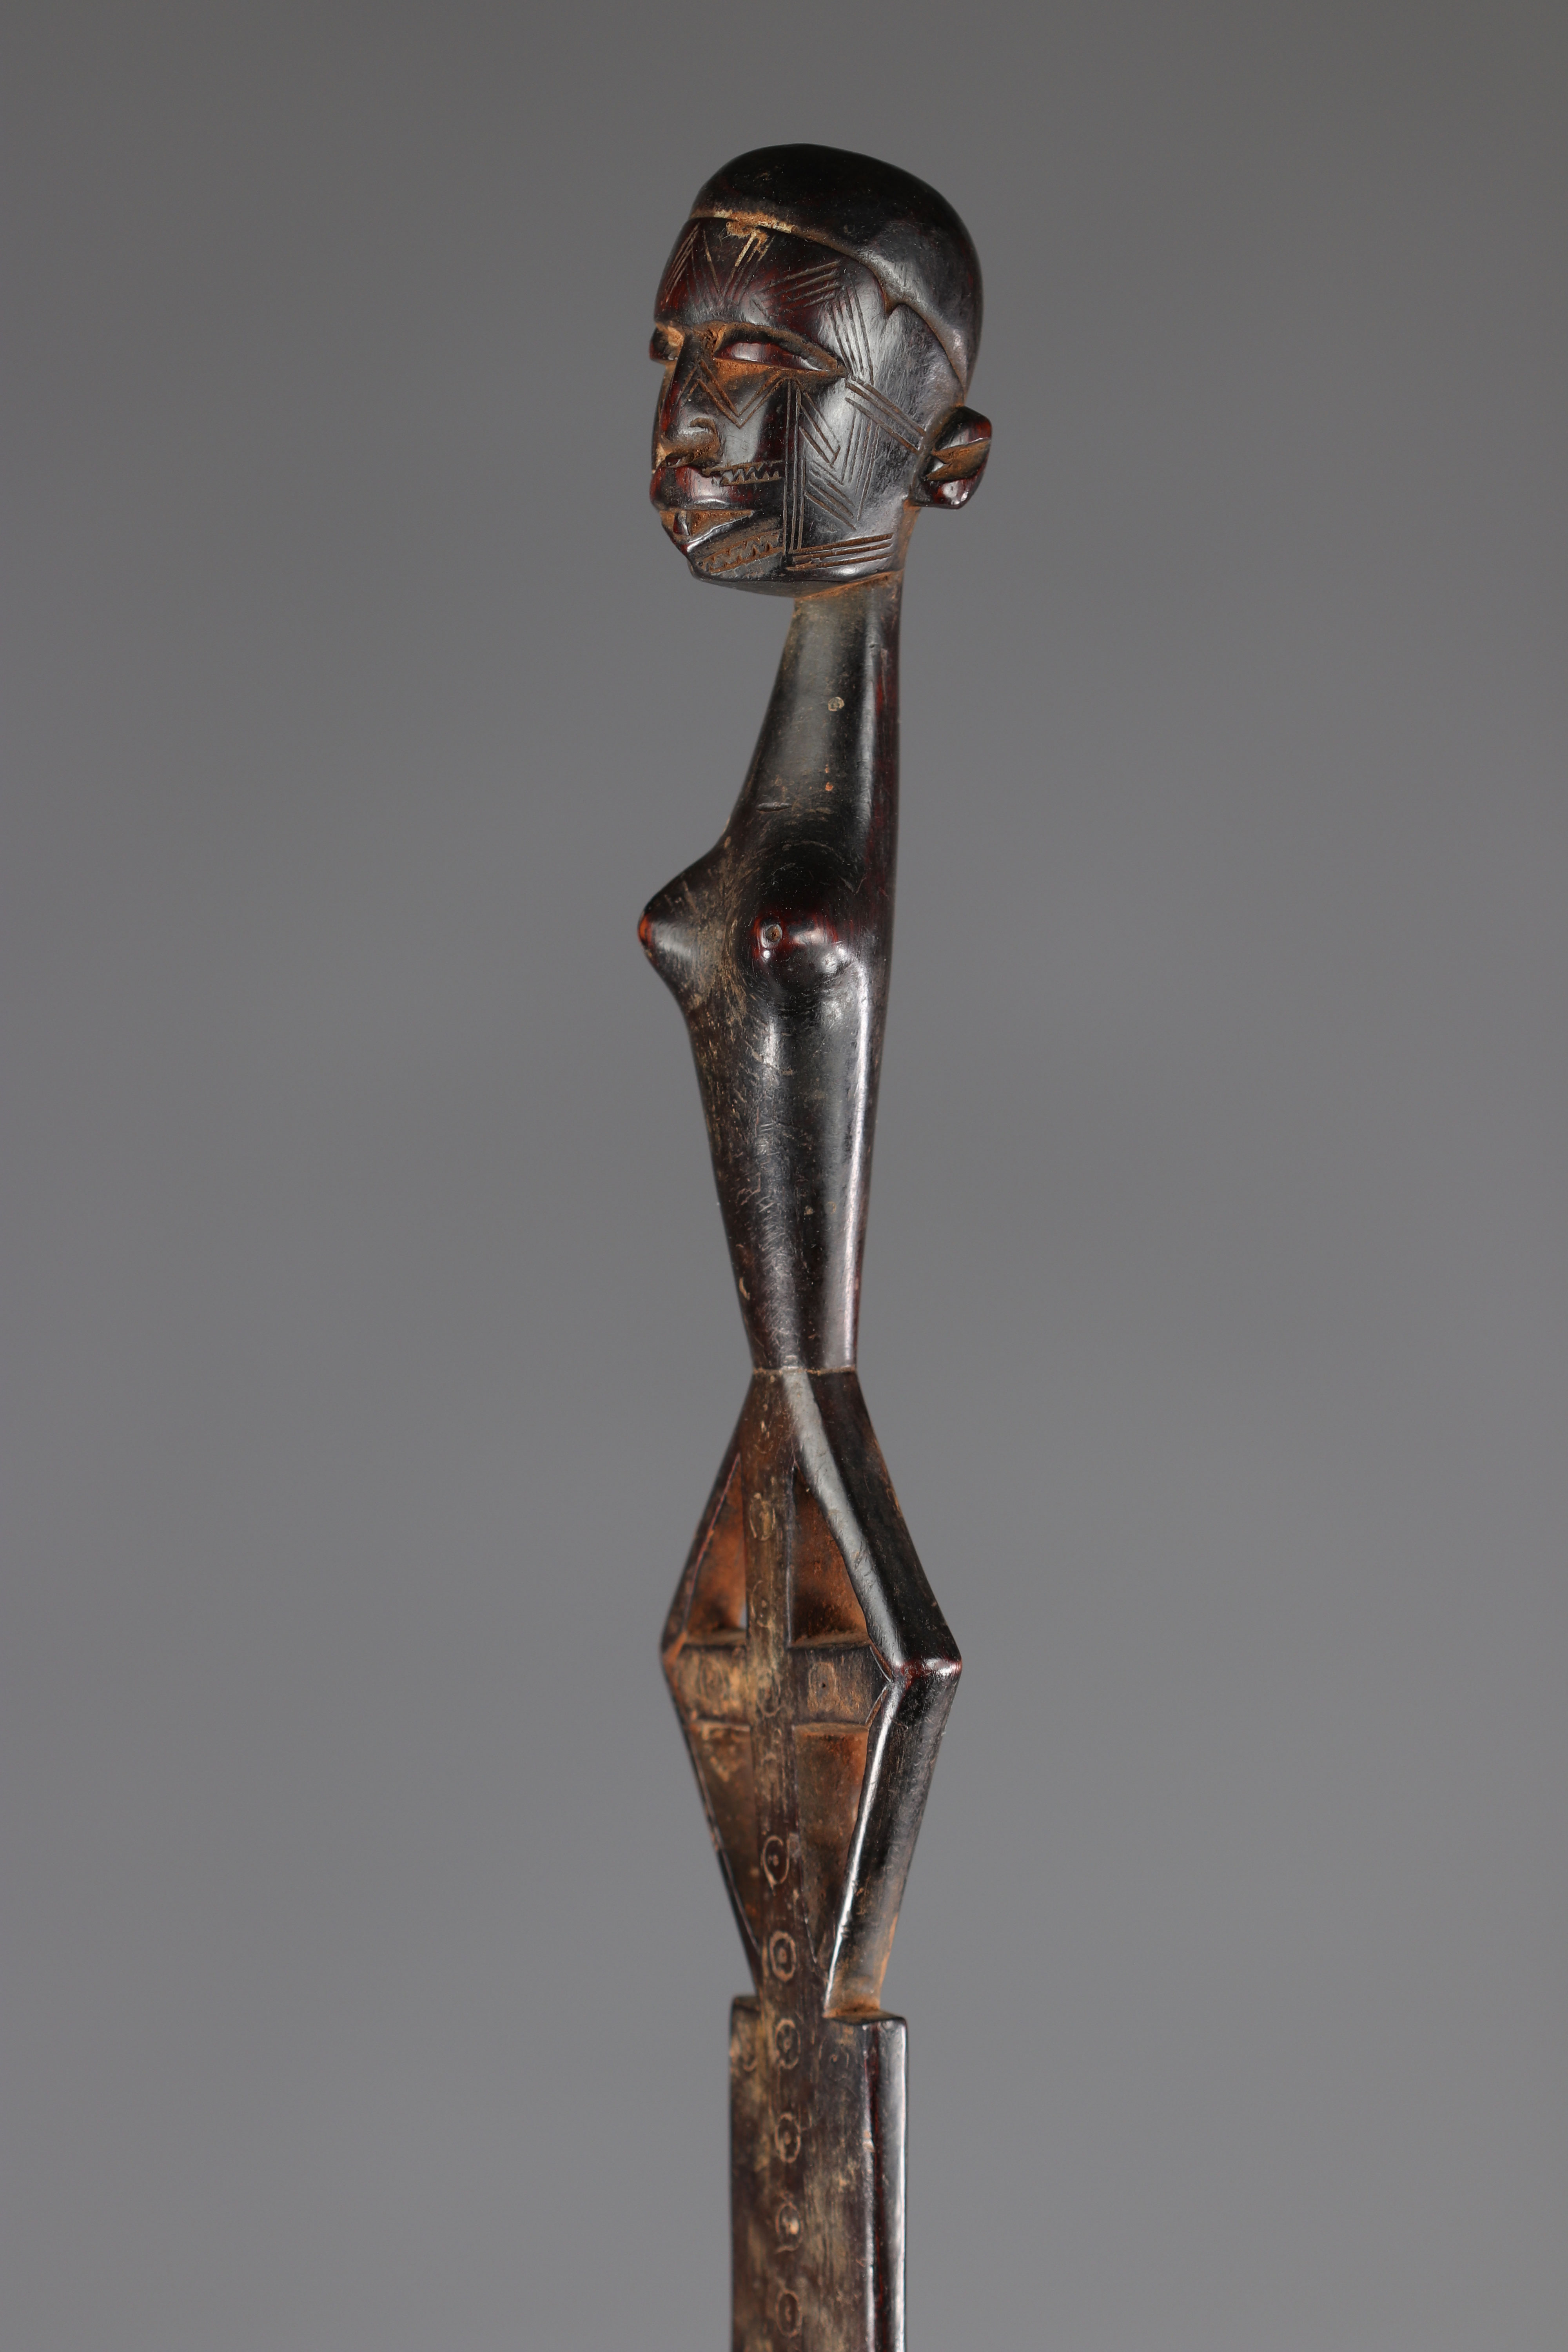 Scepter of dignitary Makonde 20th century - private collection Belgium- Tanzania - Africa - Image 5 of 6